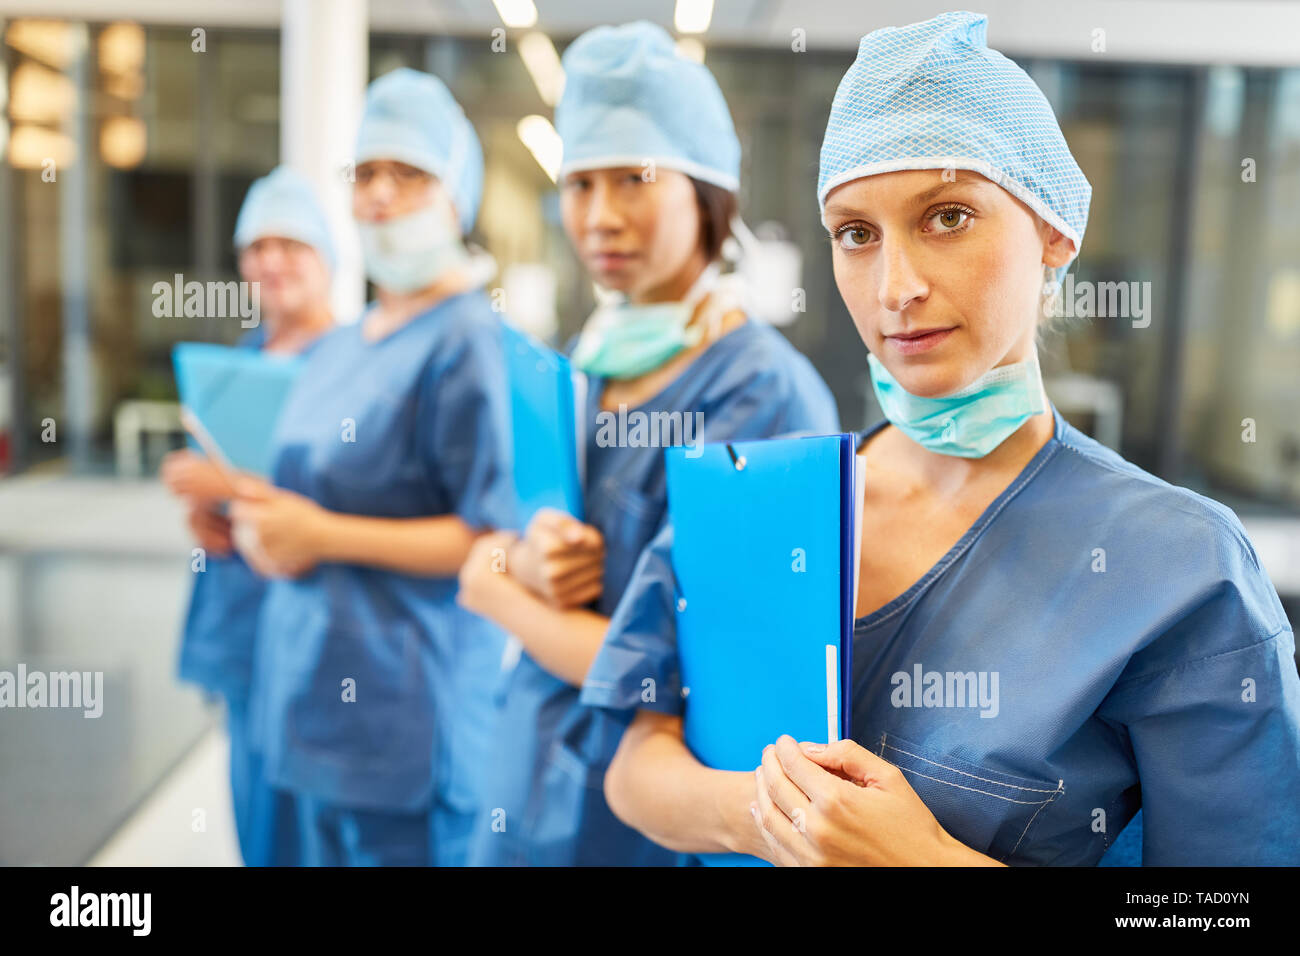 Young female doctor in blue surgical clothing together with colleagues as surgery team Stock Photo